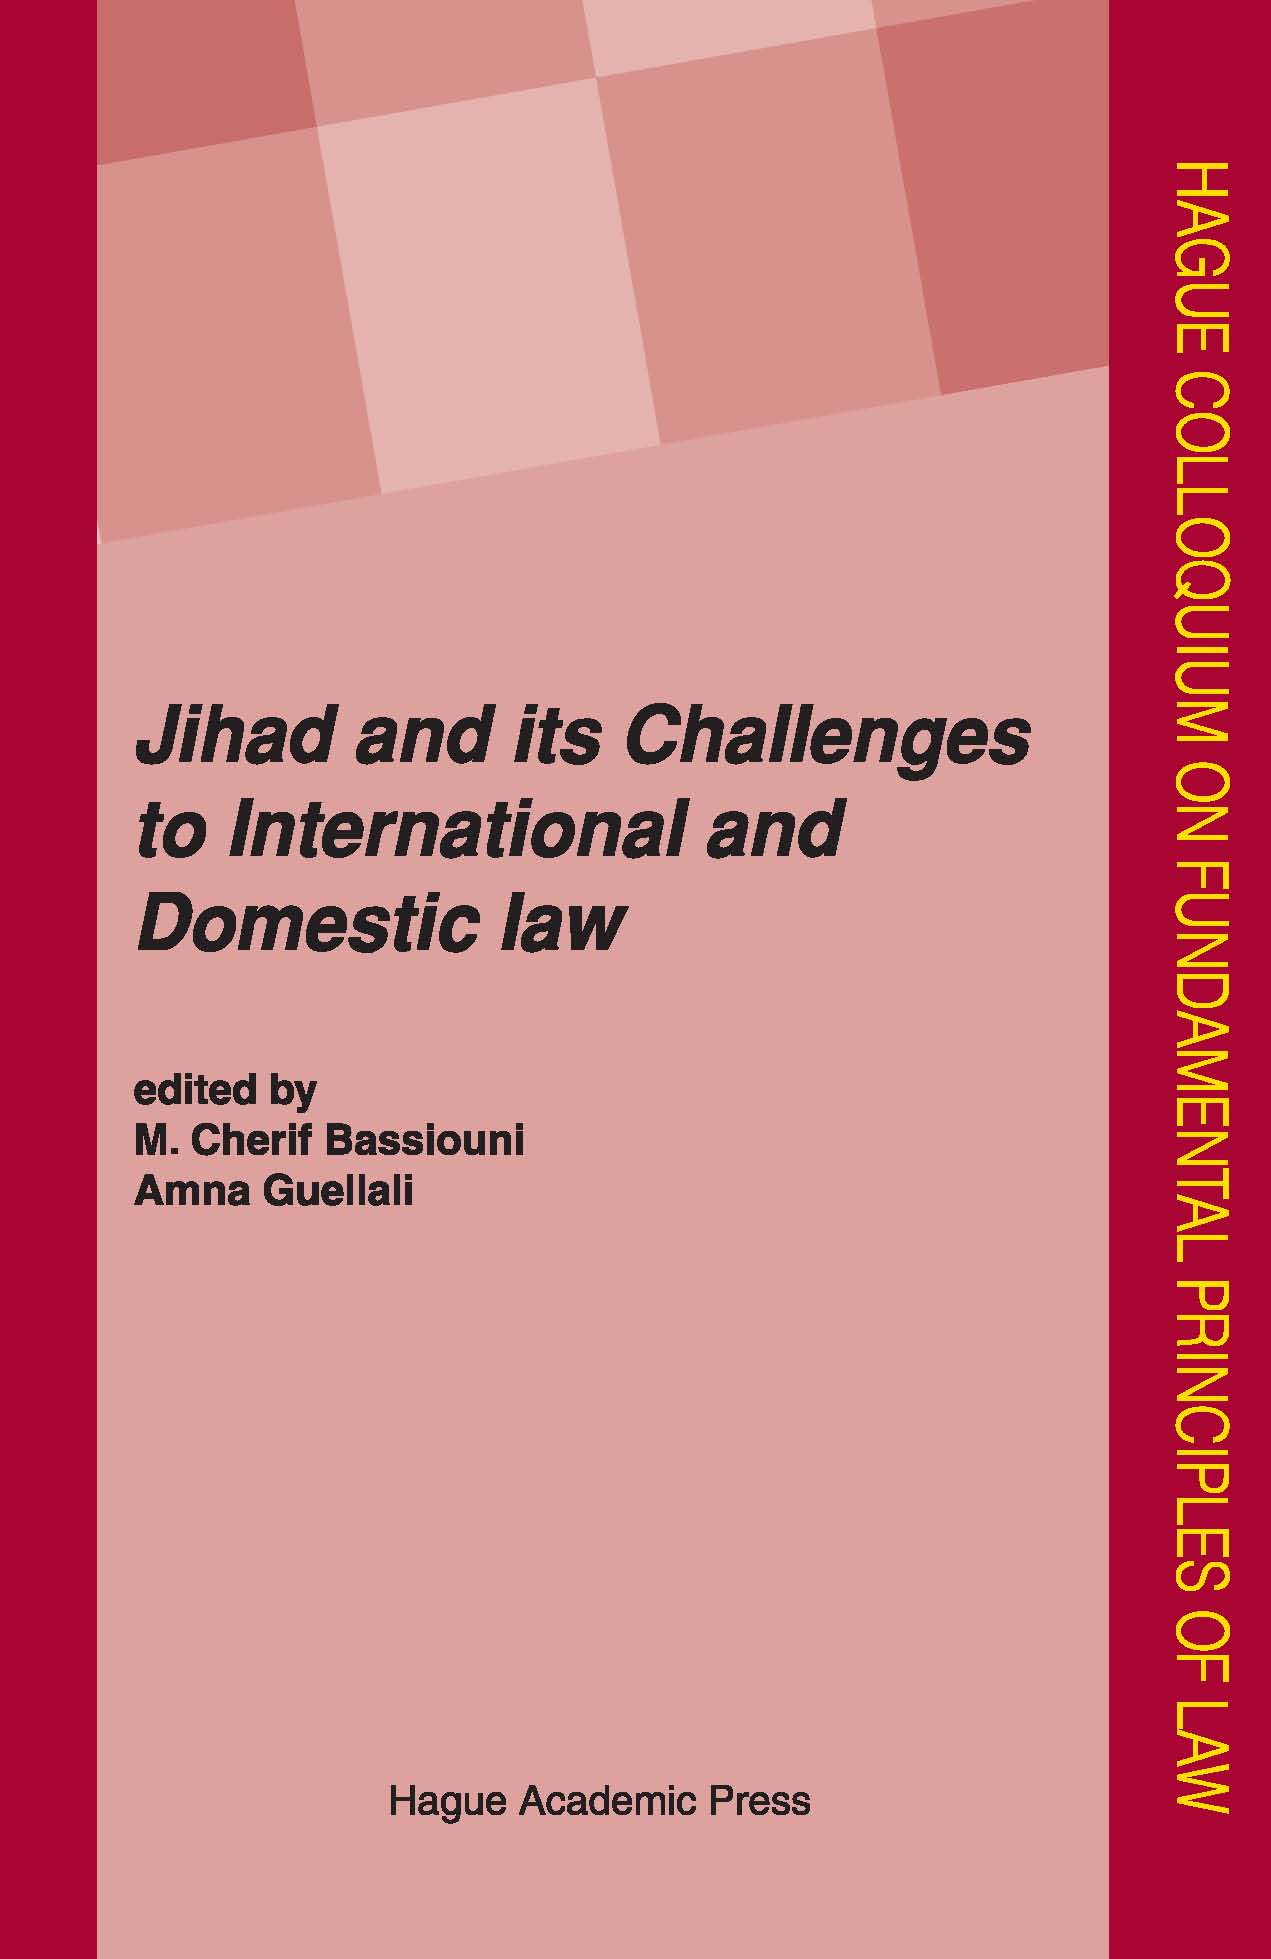 Jihad - Challenges to International and Domestic Law